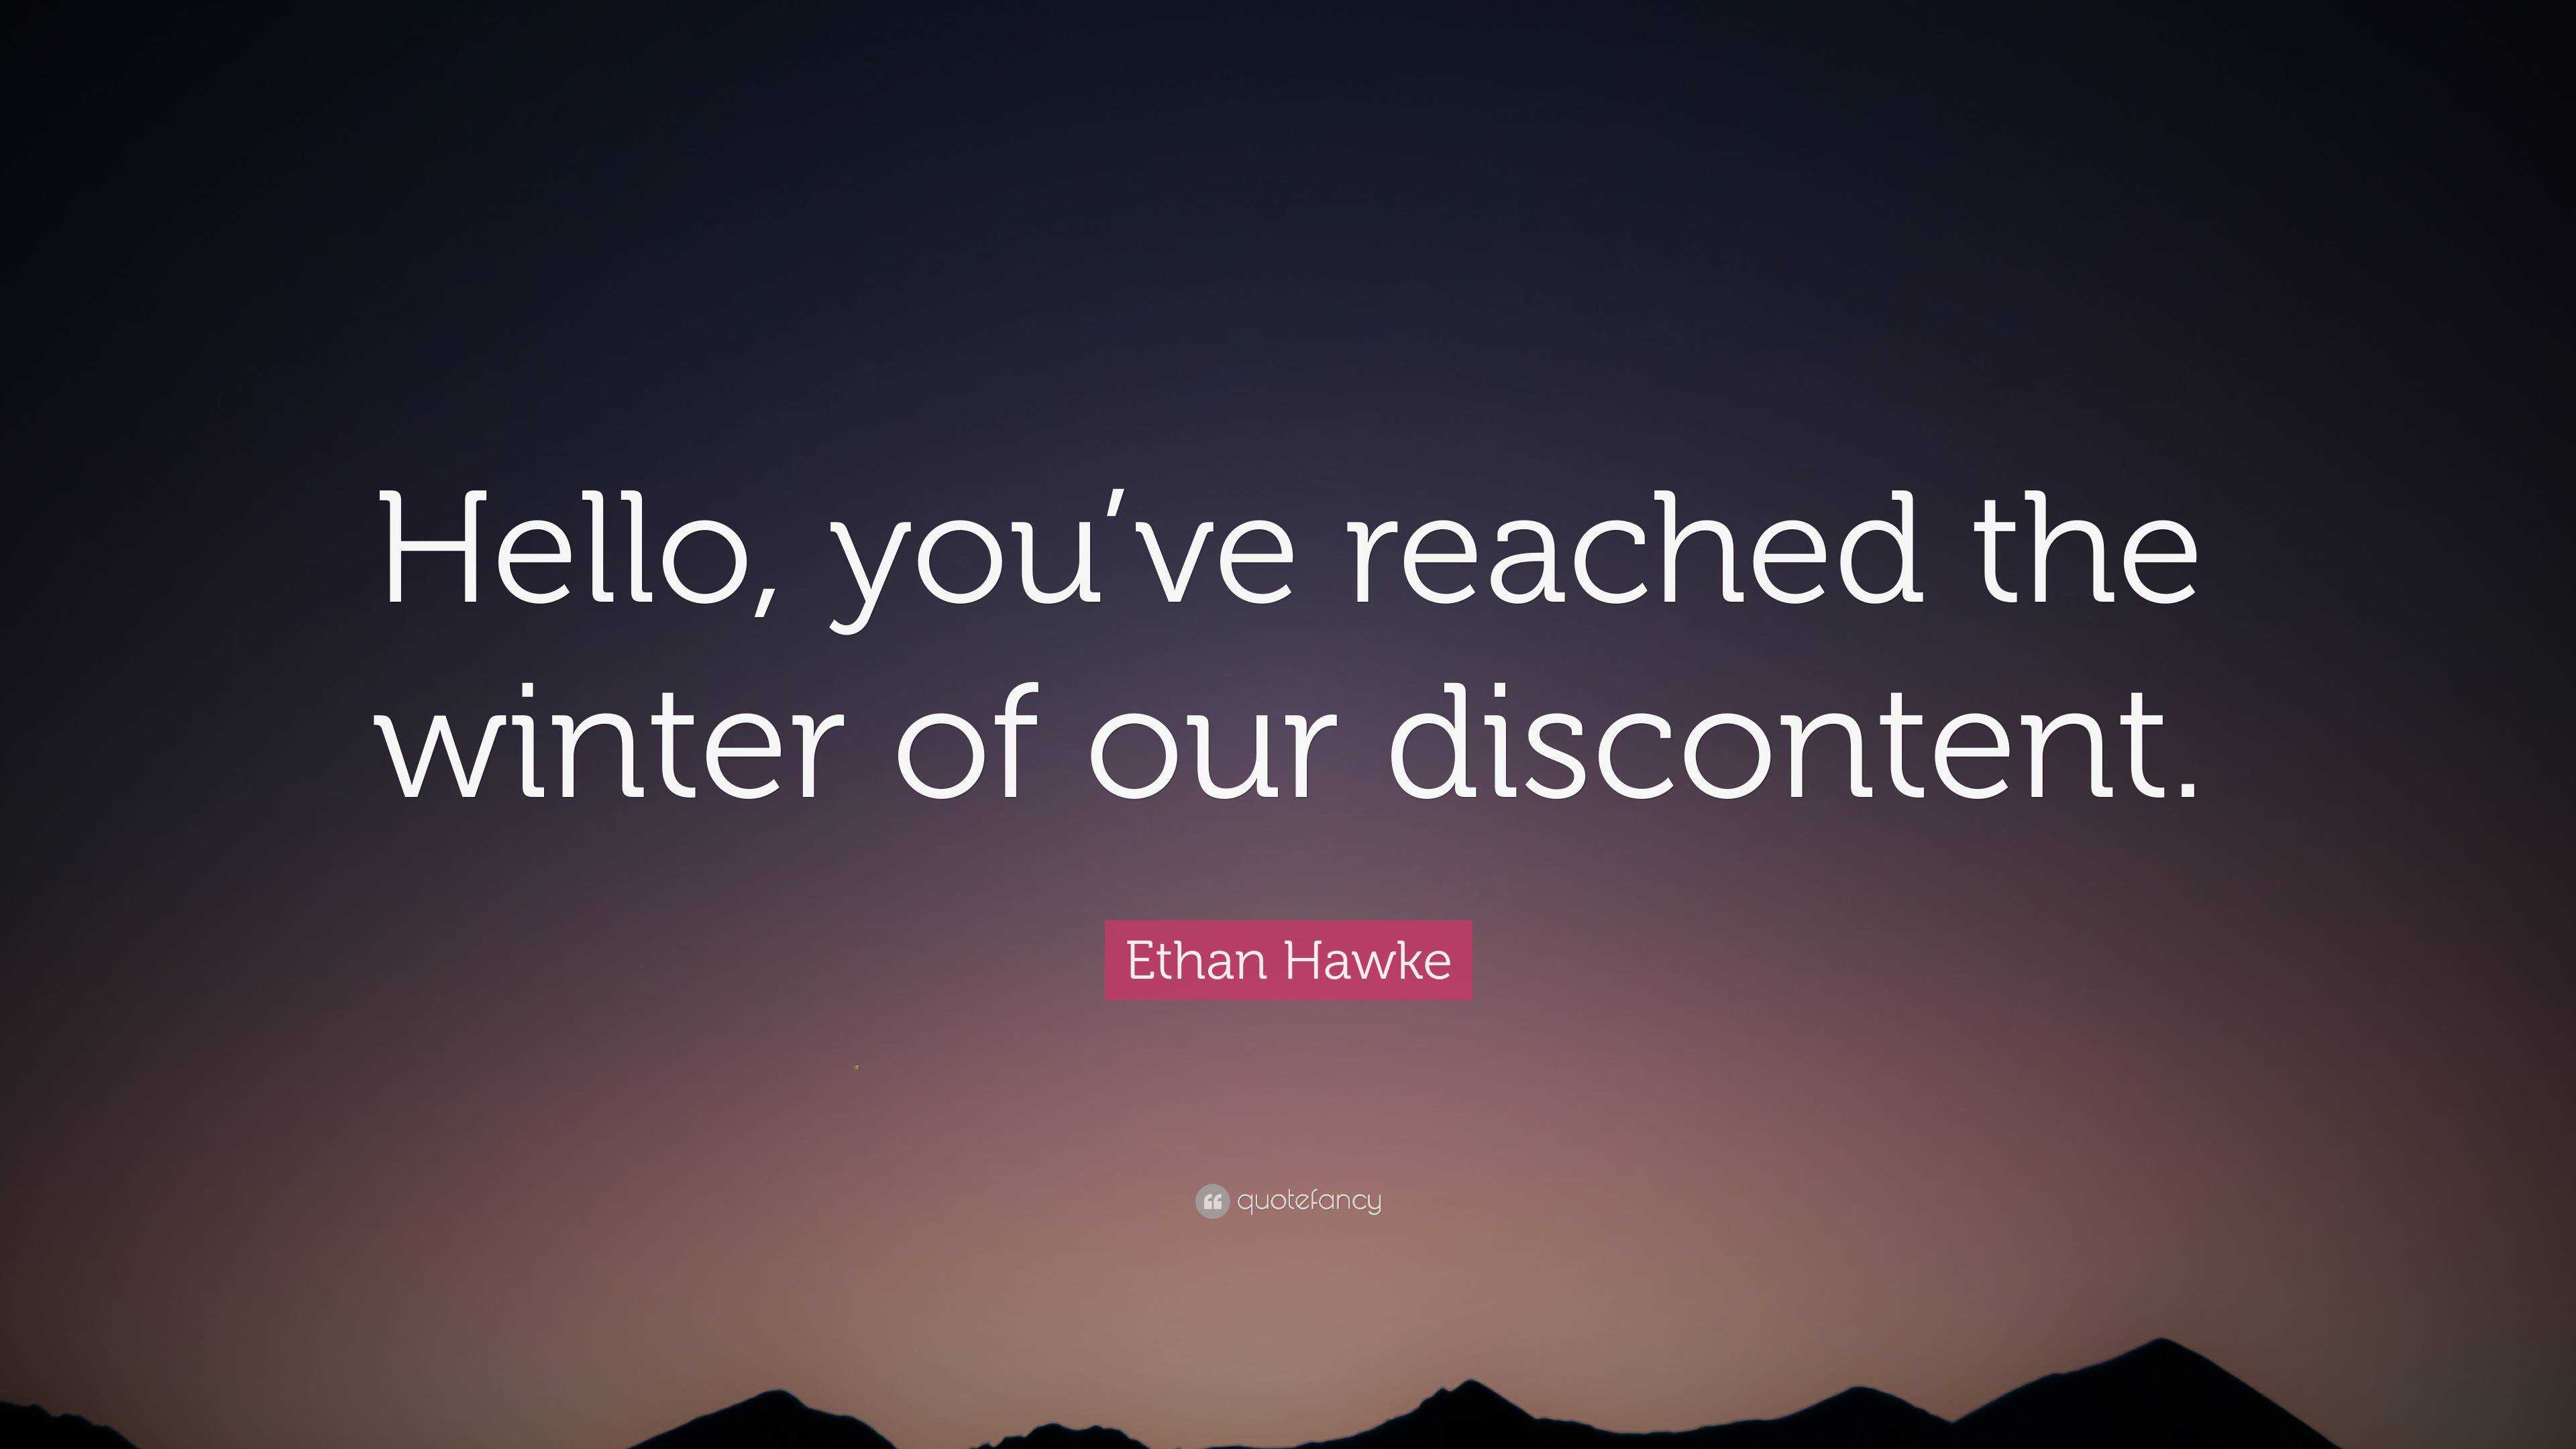 Ethan Hawke Quote “hello You Ve Reached The Winter Of Our Discontent ”